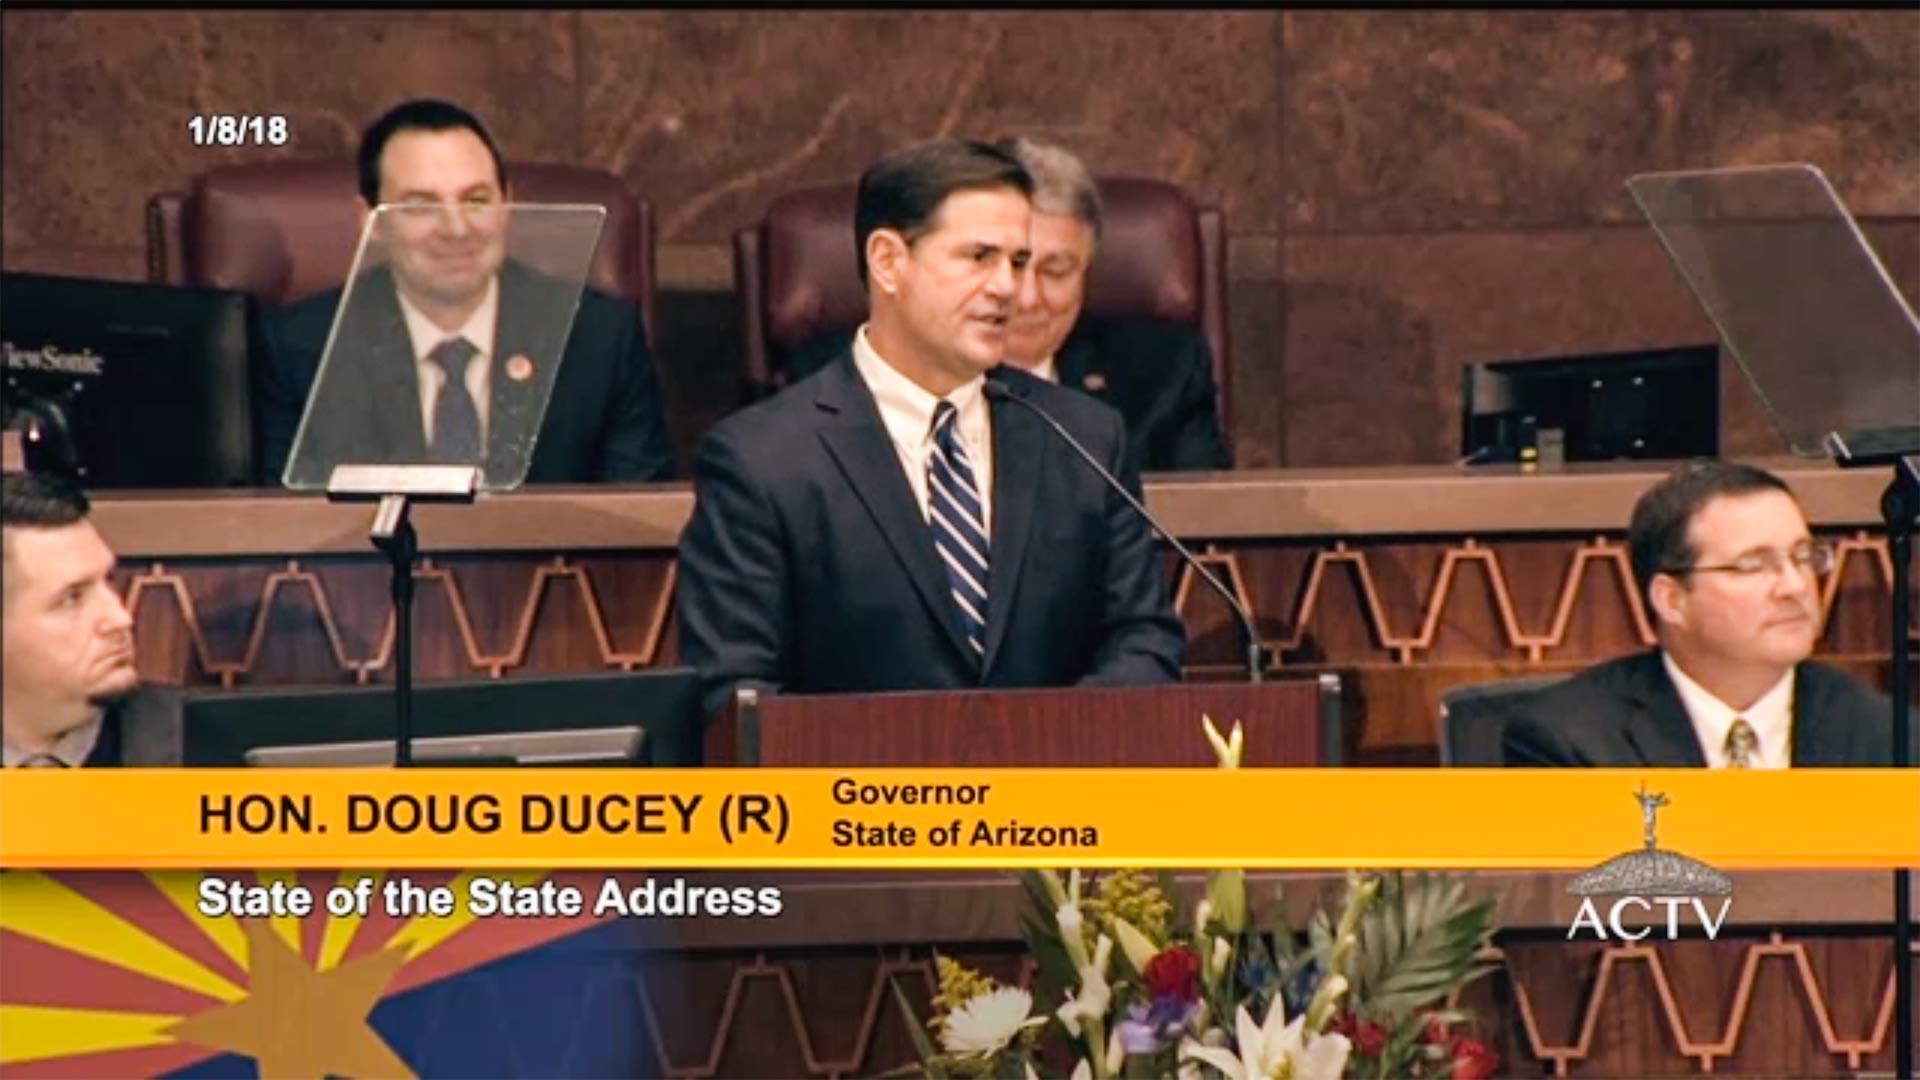 Gov. Doug Ducey delivering the state of the state address in Phoenix on Jan. 8, 2018.